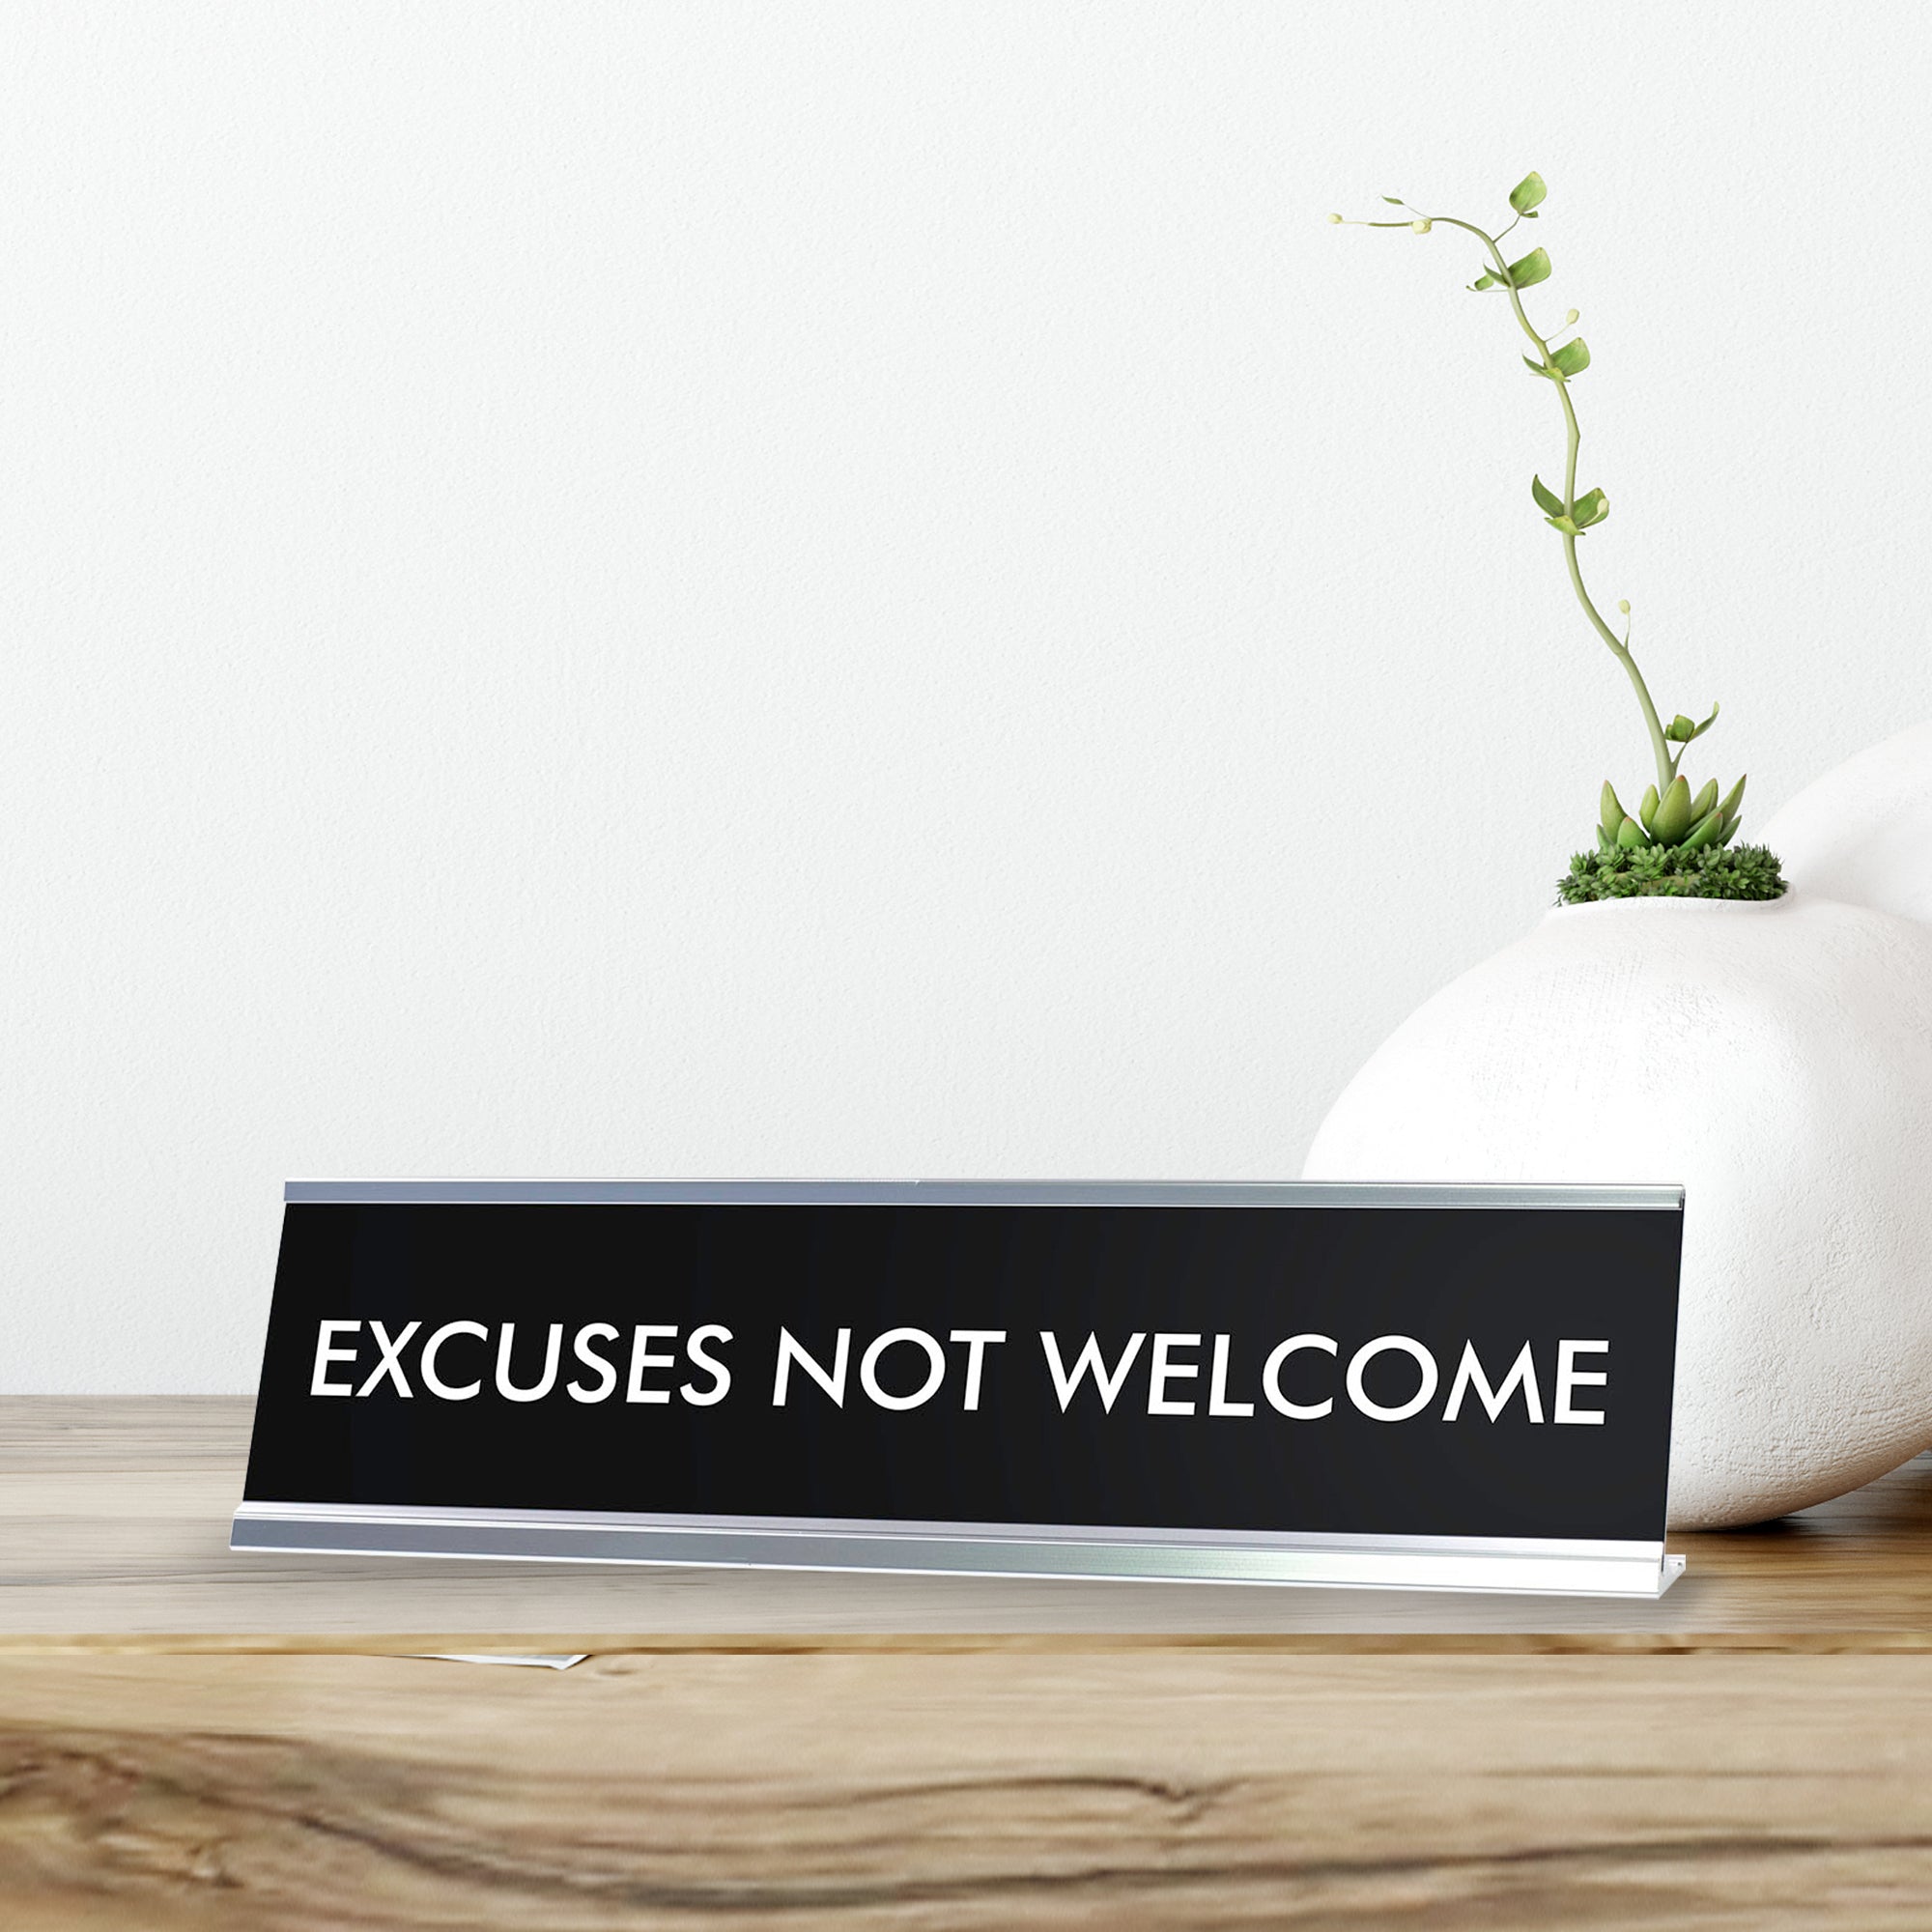 EXCUSES NOT WELCOME Novelty Desk Sign